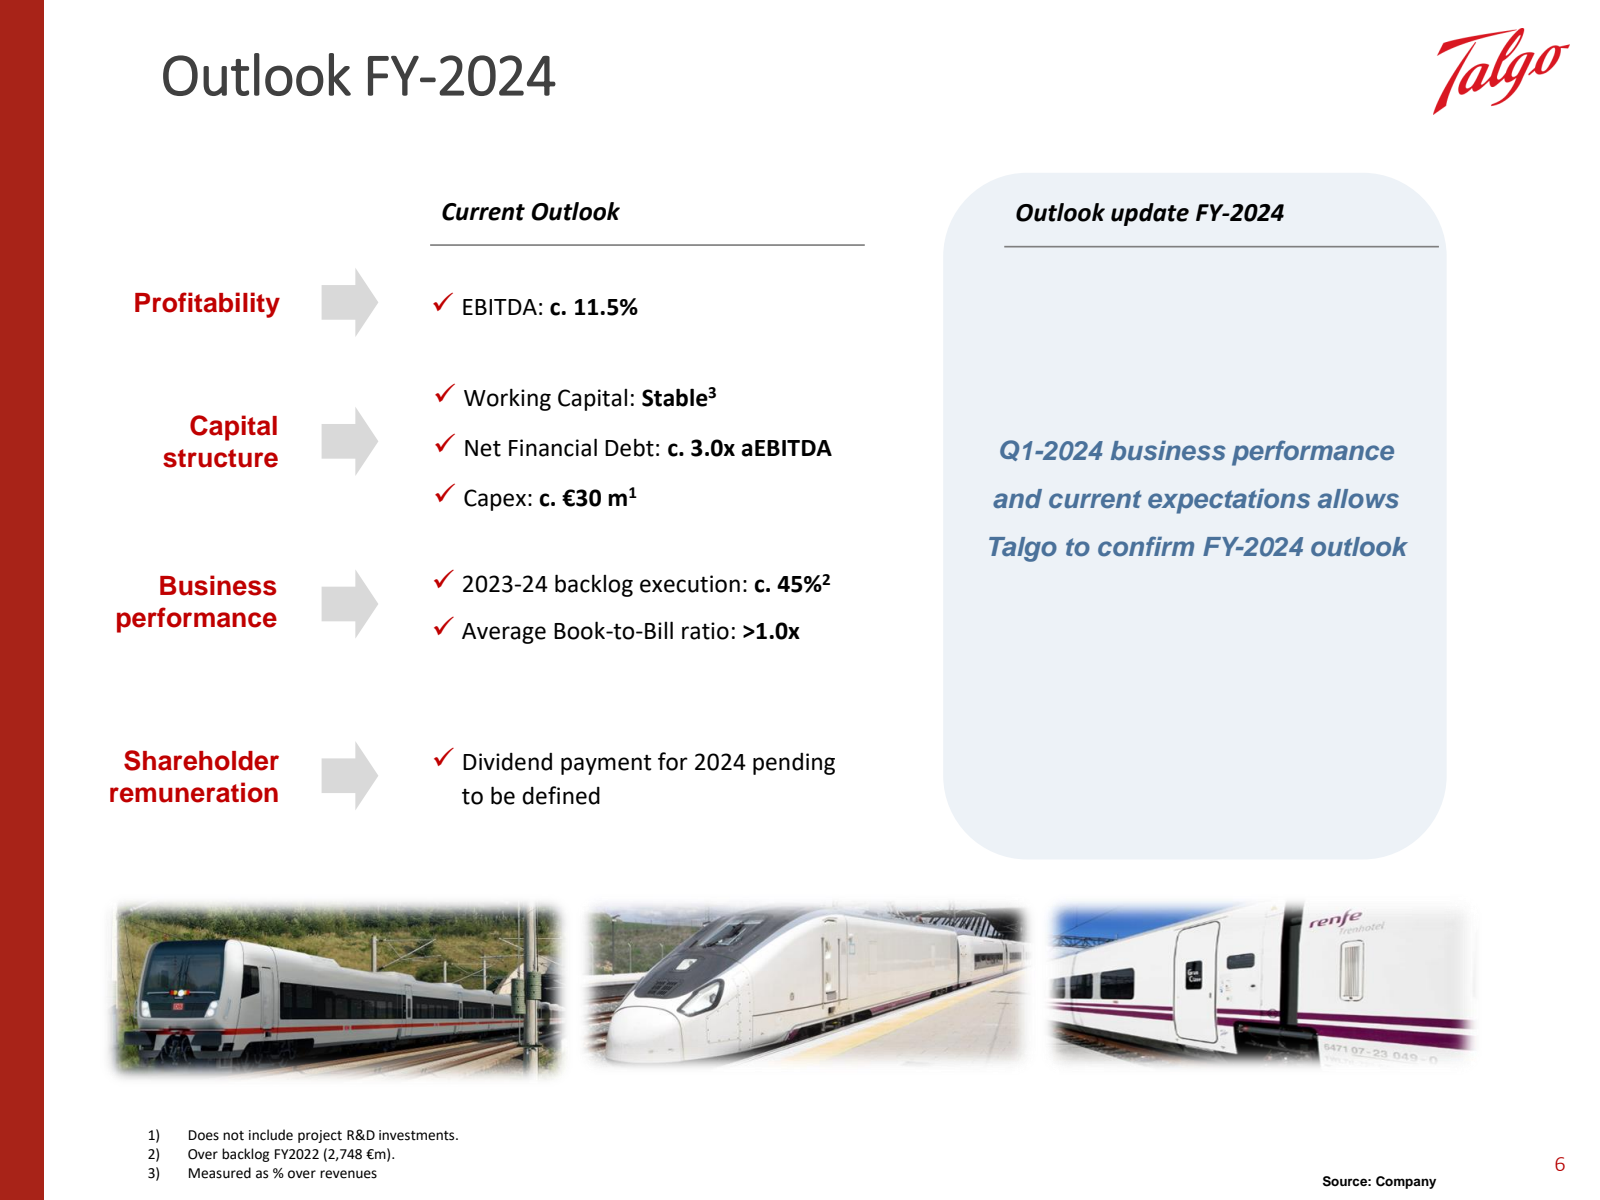 Outlook FY - 2024 

